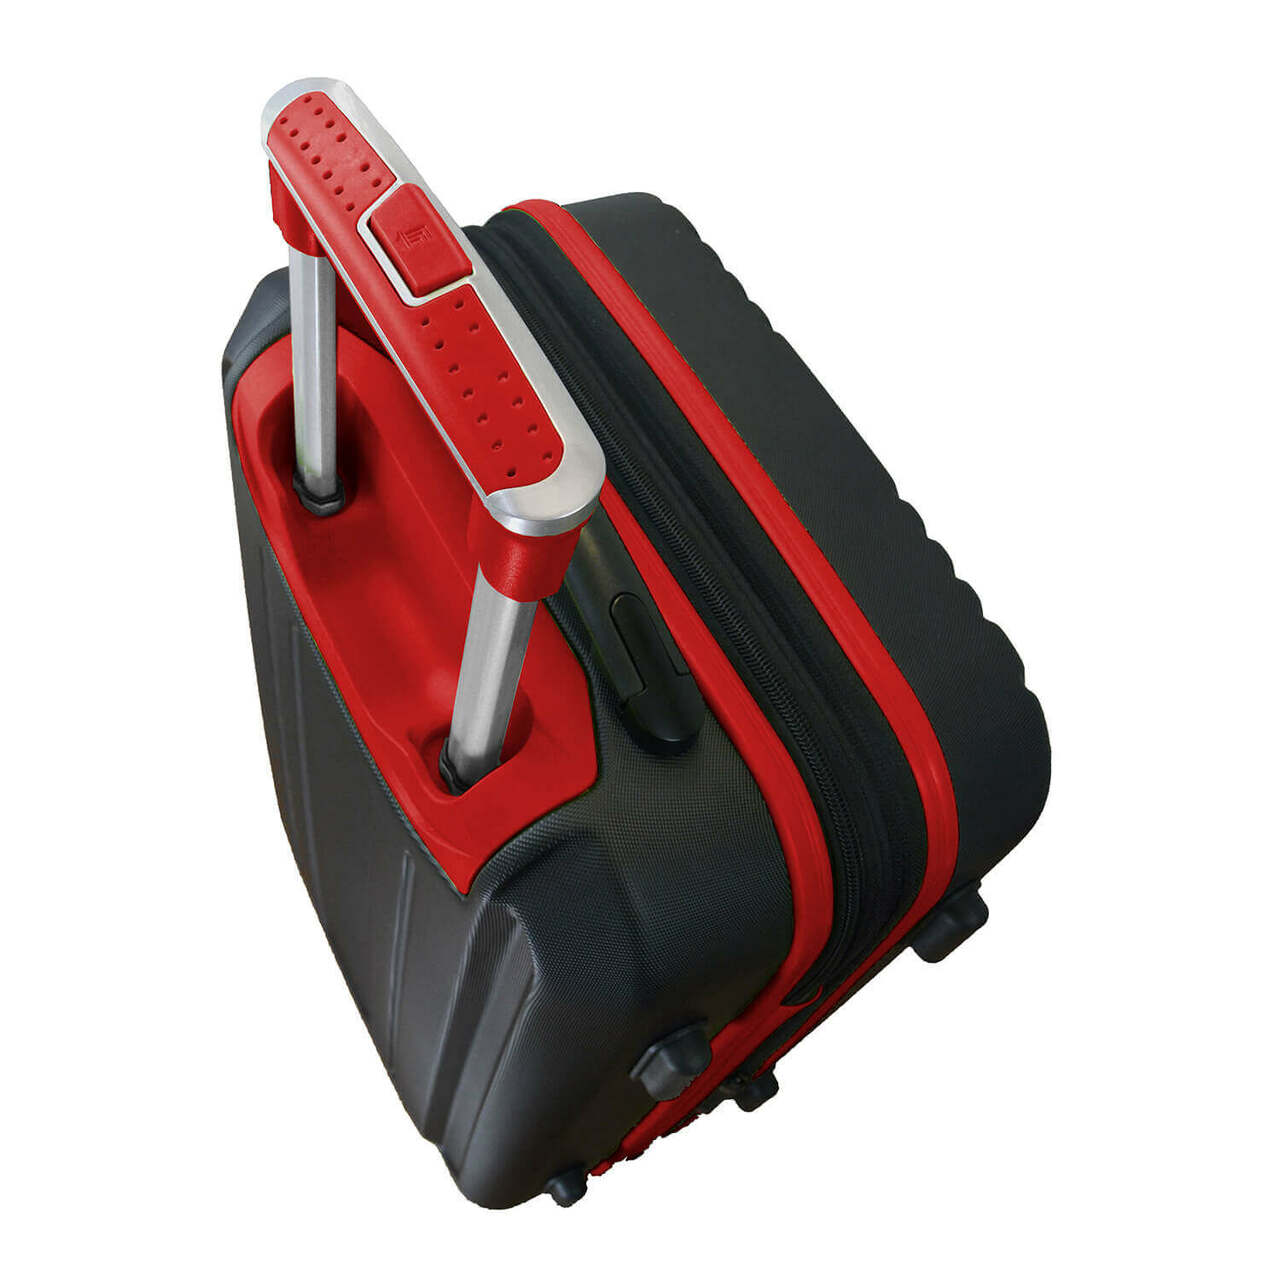 Wizards Carry On Spinner Luggage | Washington Wizards Hardcase Two-Tone Luggage Carry-on Spinner in Red